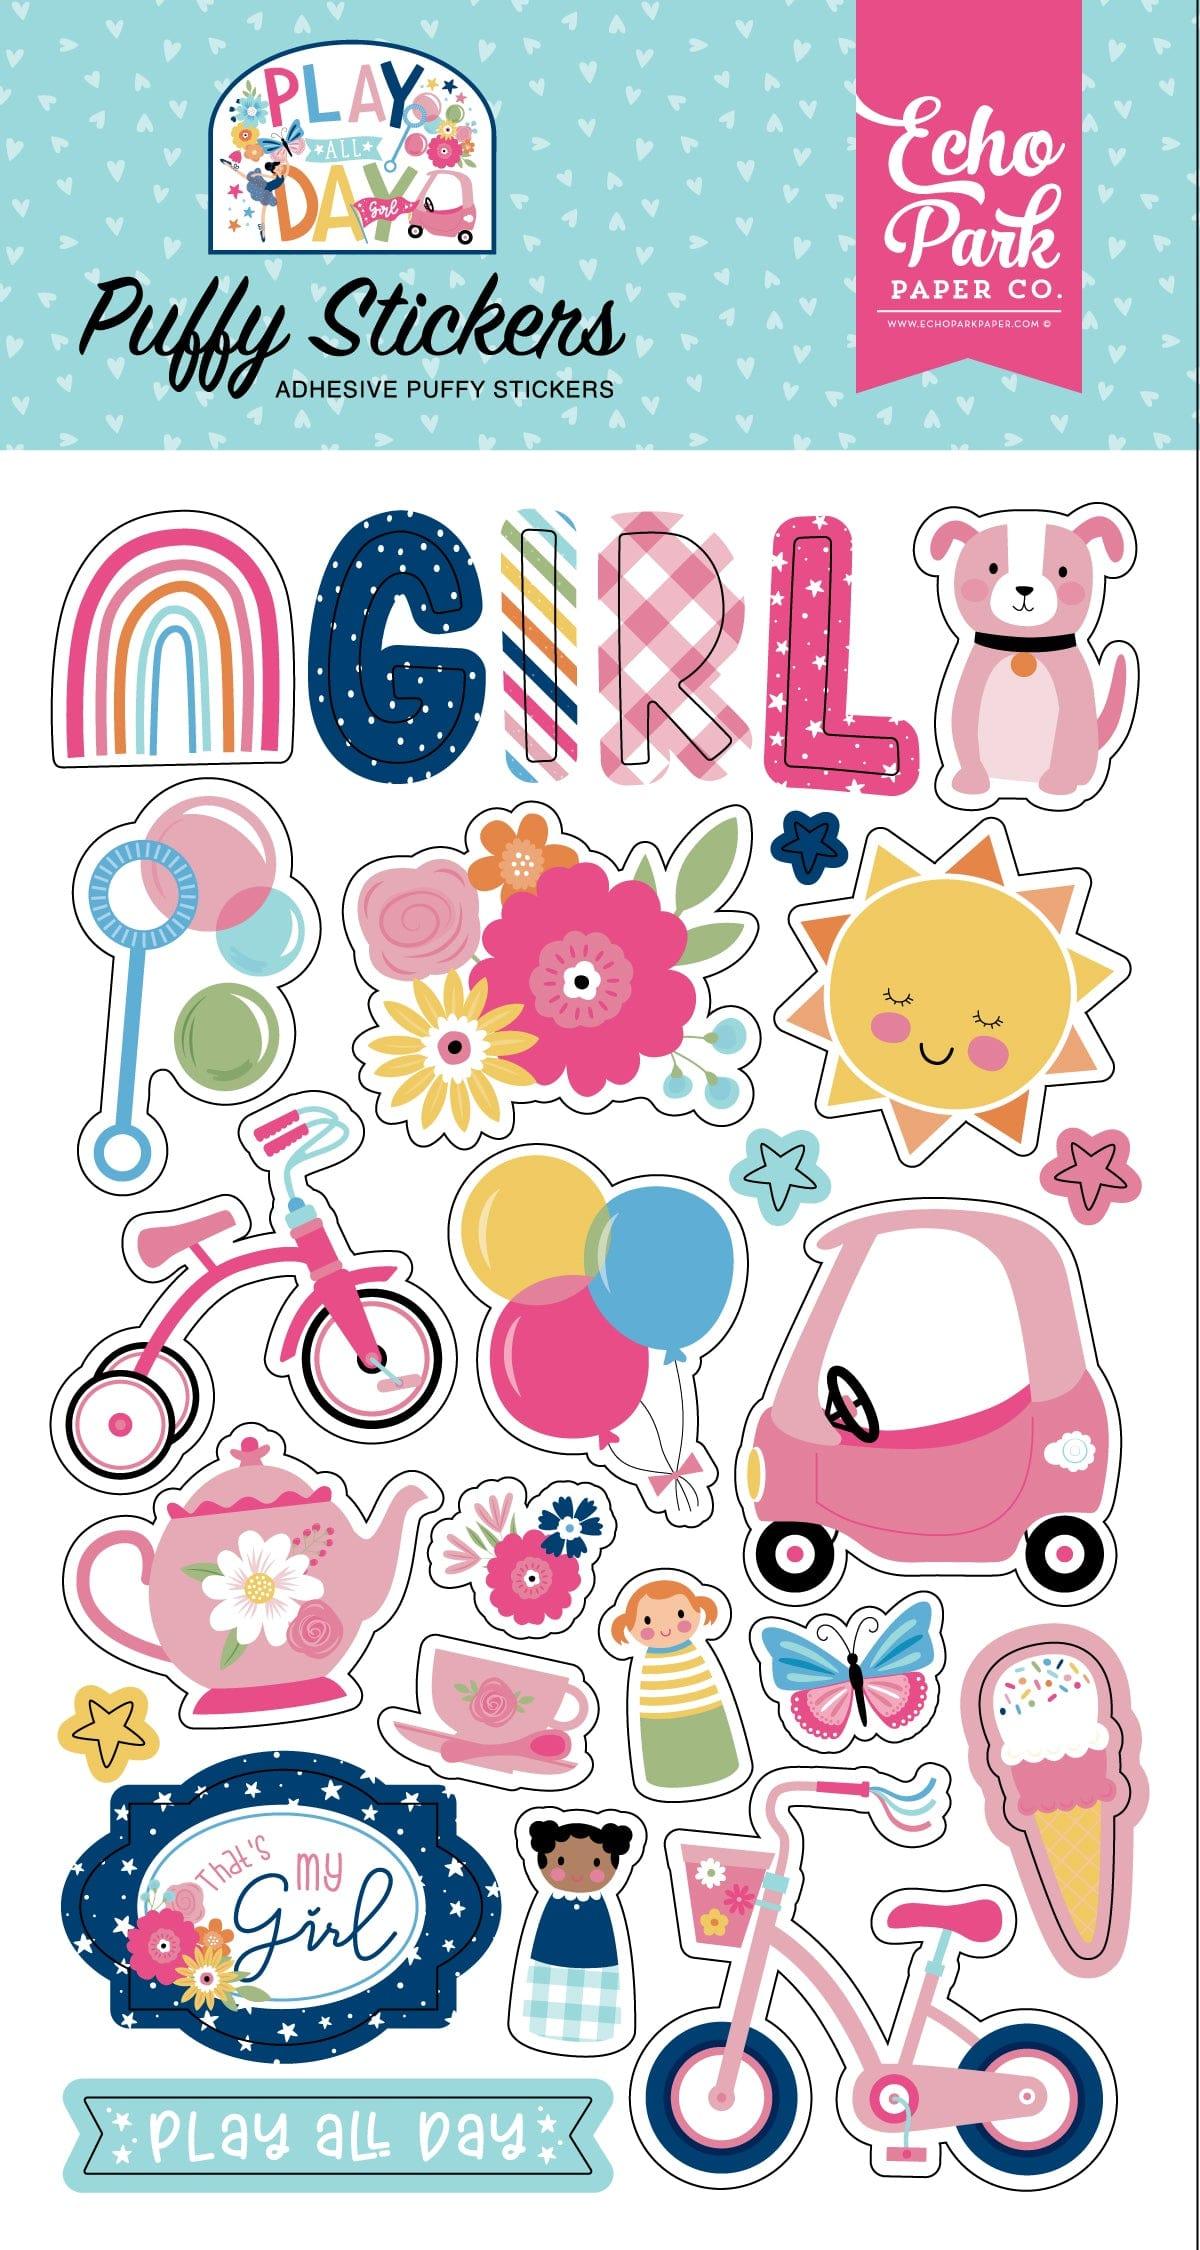 Play All Day Girl Collection 4 x 7 Puffy Stickers Scrapbook Embellishments by Echo Park Paper - Scrapbook Supply Companies